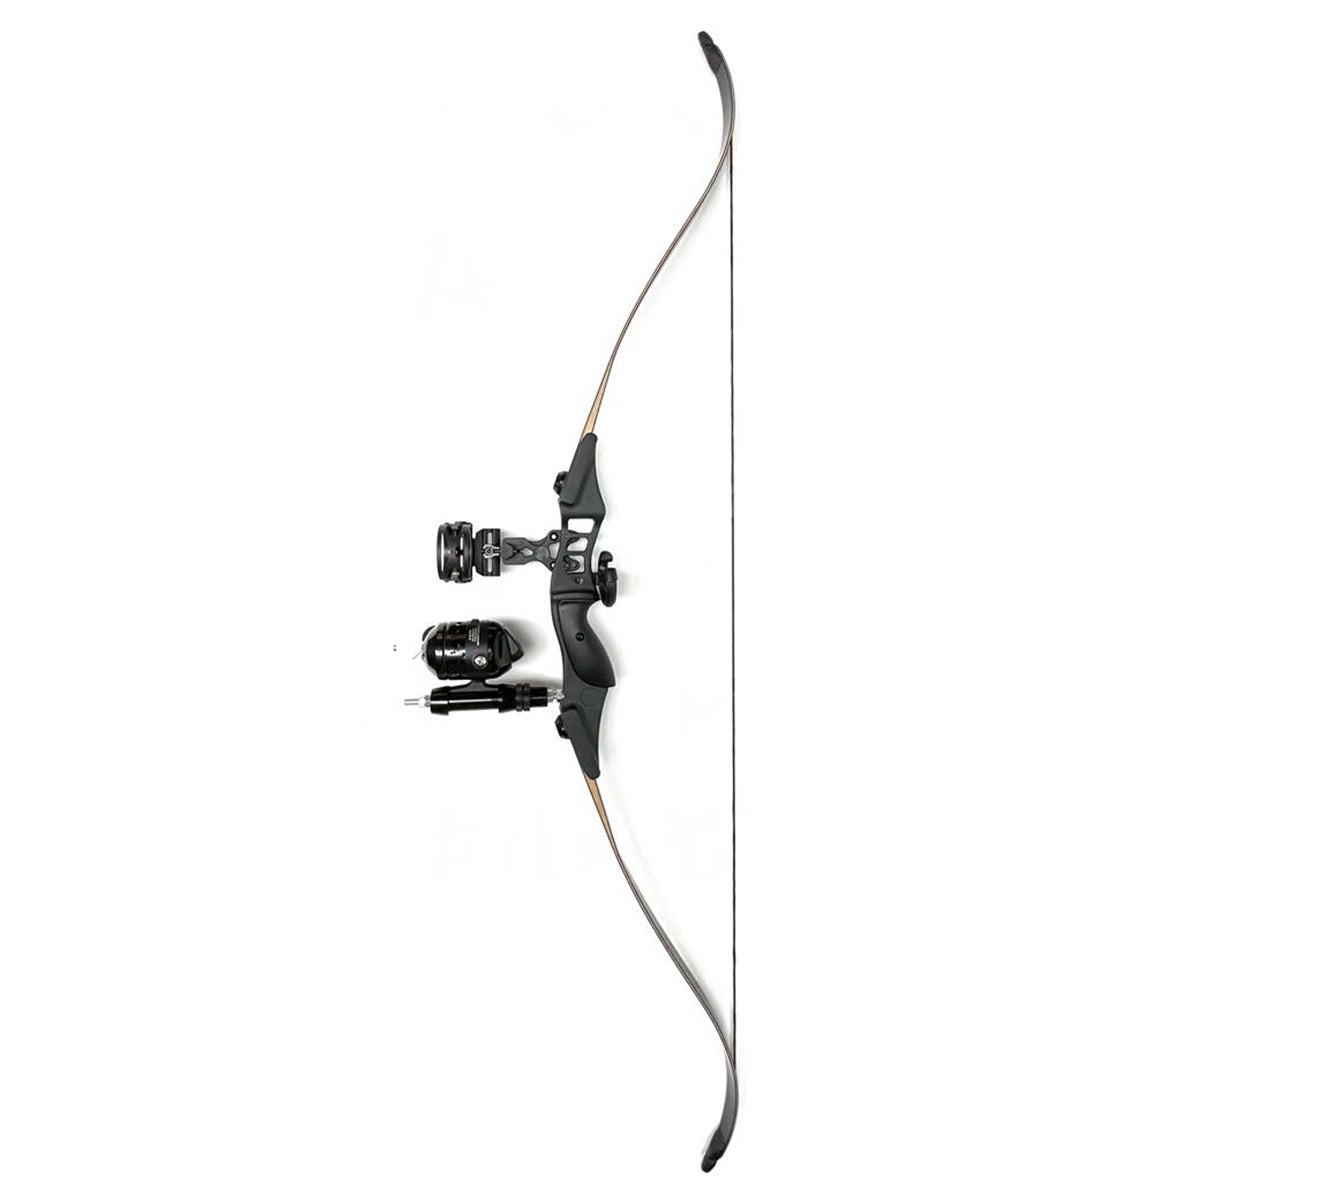  Bowfishing Recurve Bows Kit for Adult Youth 30-50LBS  Adjustable Hunting Practice Shooting Fish with Solid Fishing Arrows and Bowfishing  Reels (Archery kit) : Sports & Outdoors